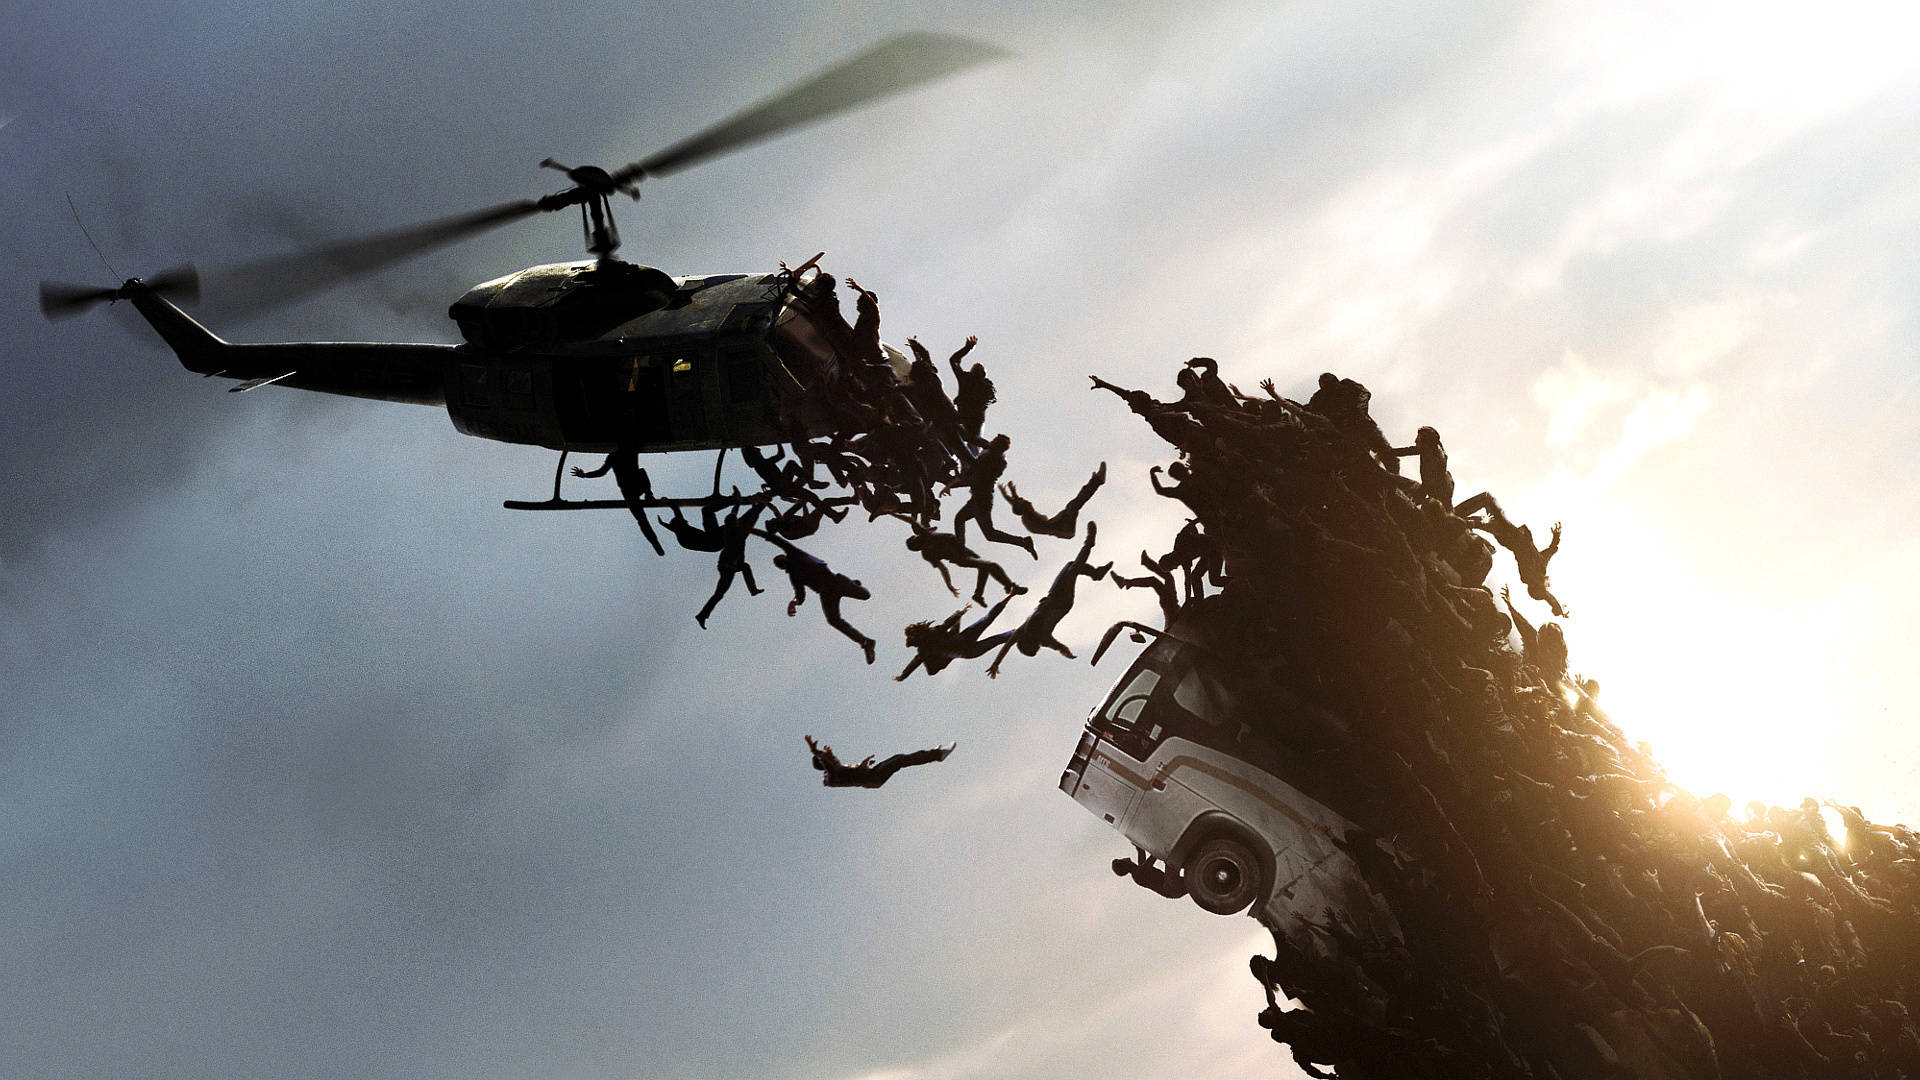 World War Z 4K Helicopter Zombies Wallpaper